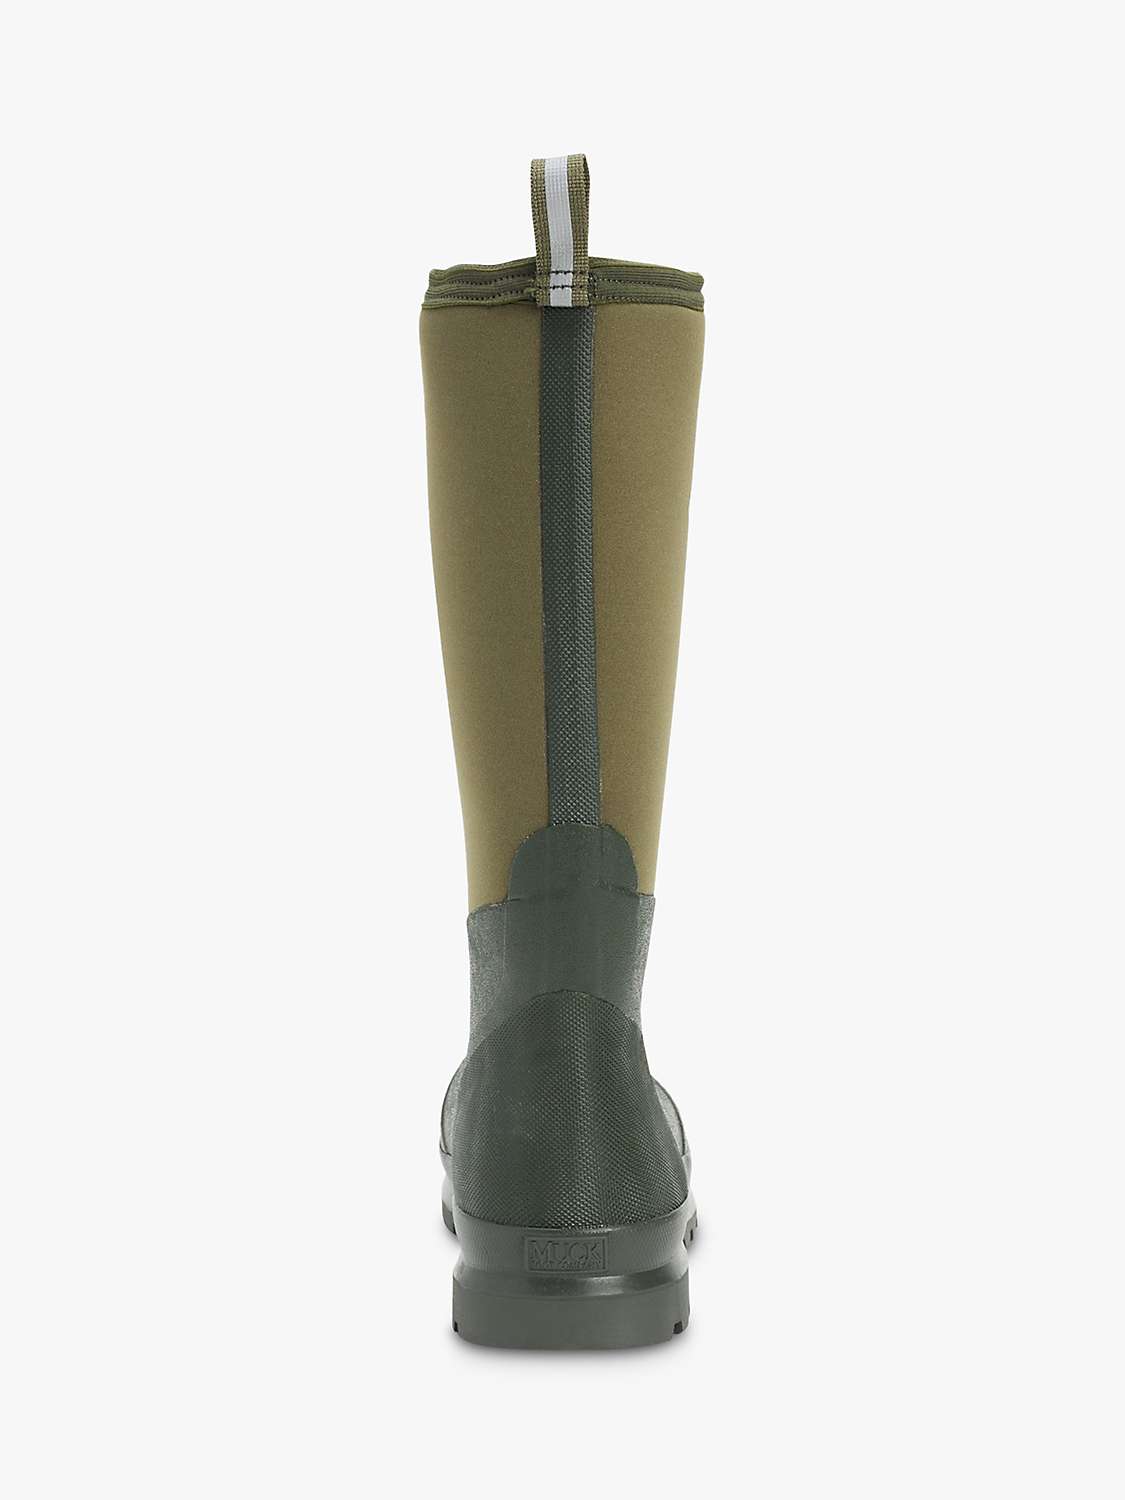 Buy Muck Chore Classic Tall Wellington Boots, Moss Online at johnlewis.com